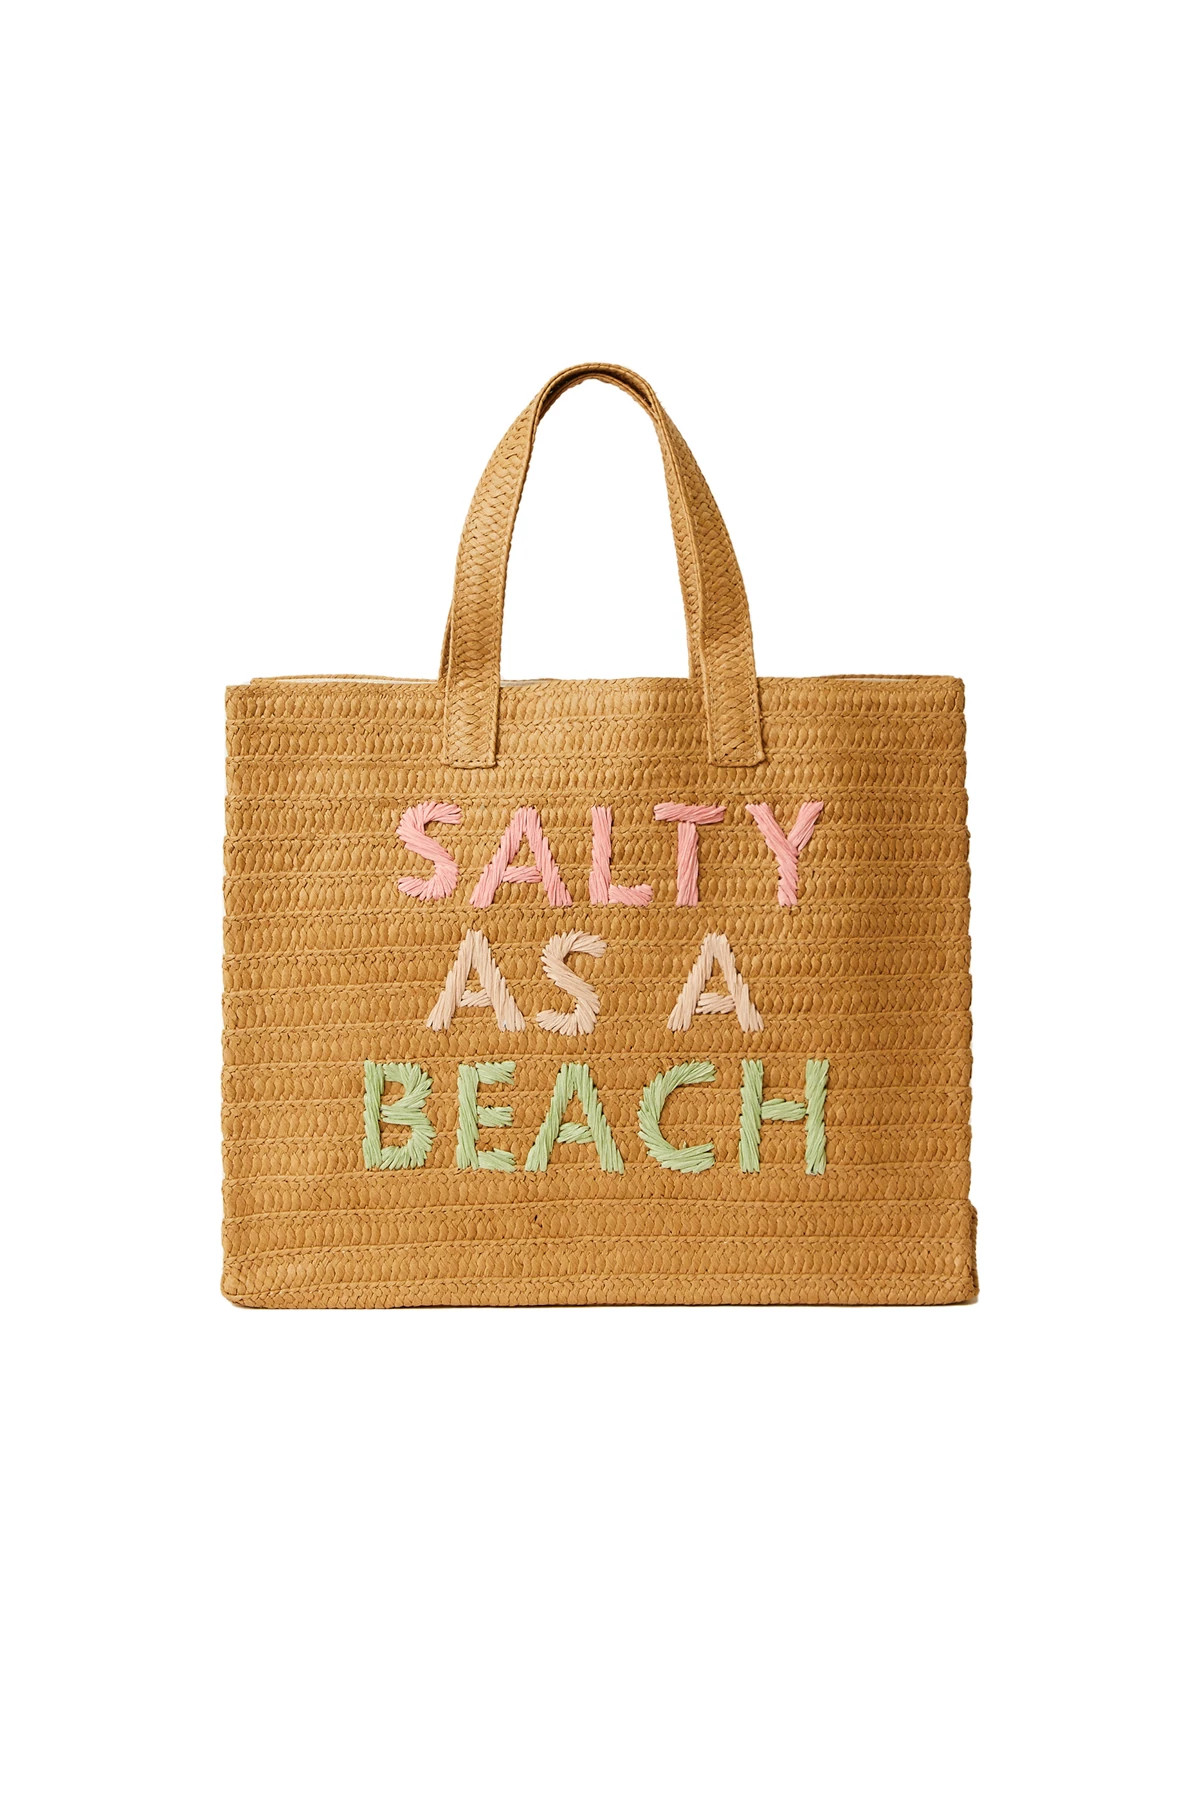 SAND/PASTEL RAINBOW Salty as a Beach Tote image number 1